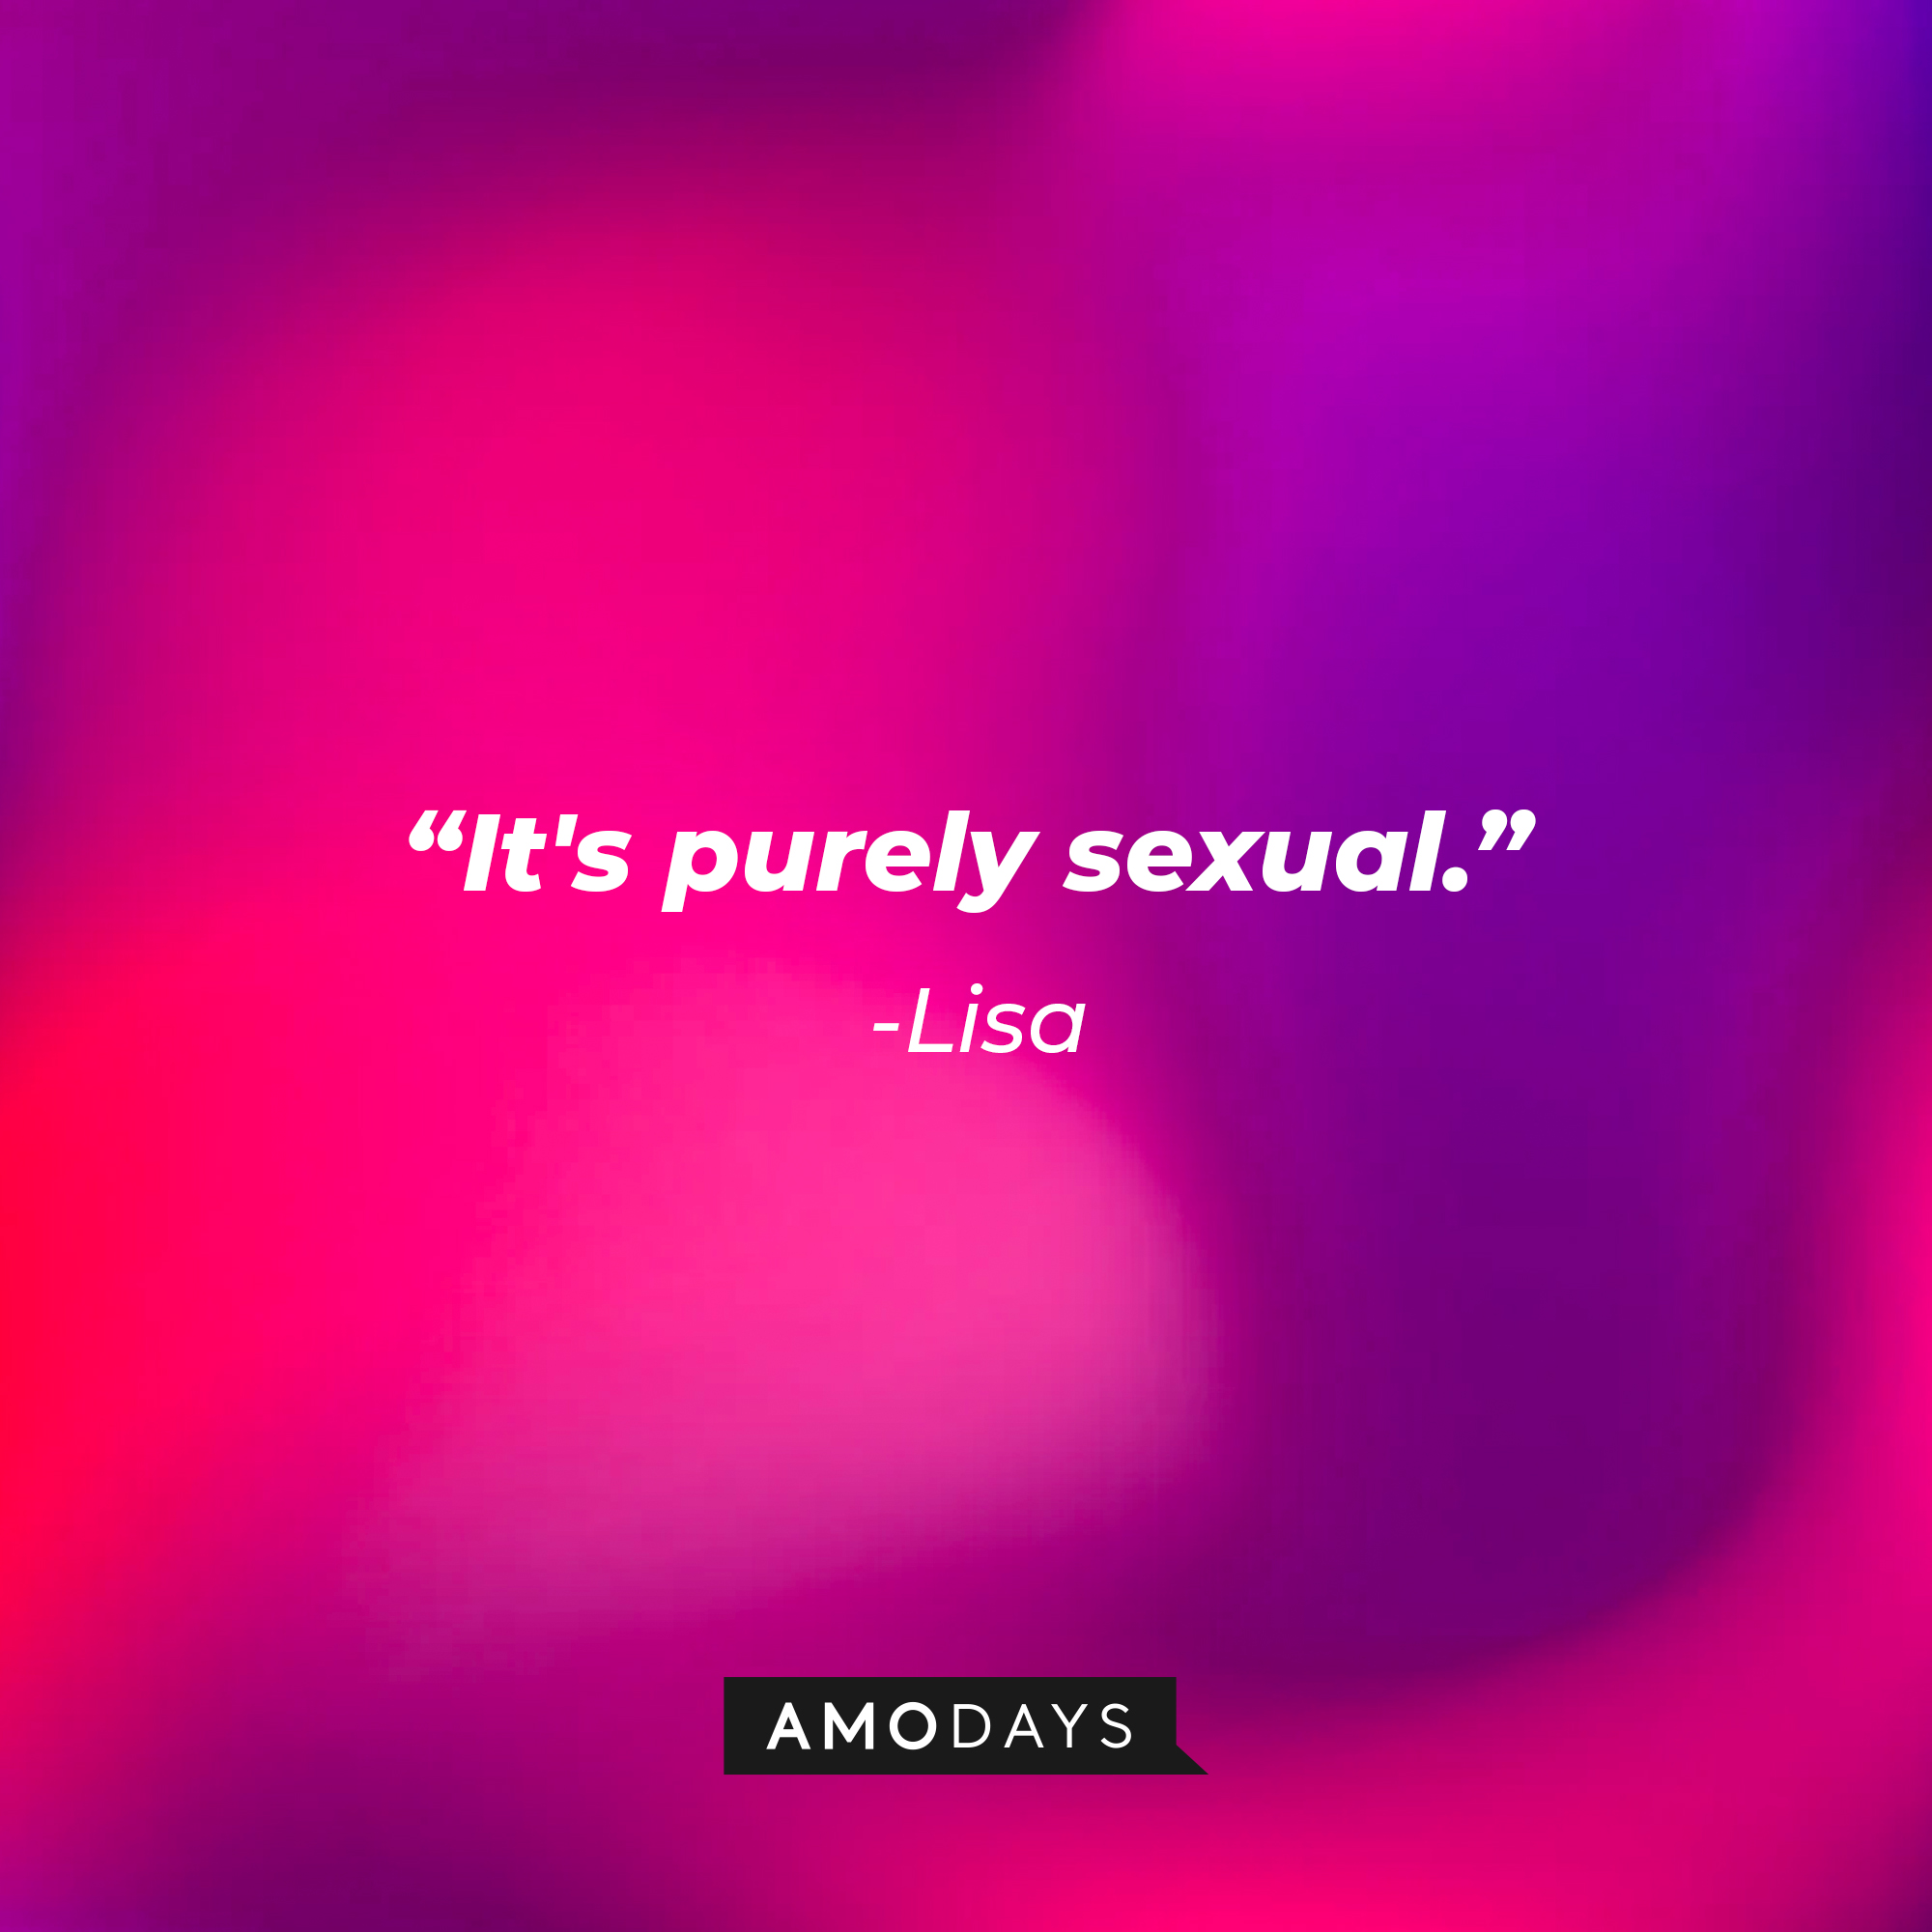 Lisa’s quote: "It's purely sexual.”| Source: AmoDays